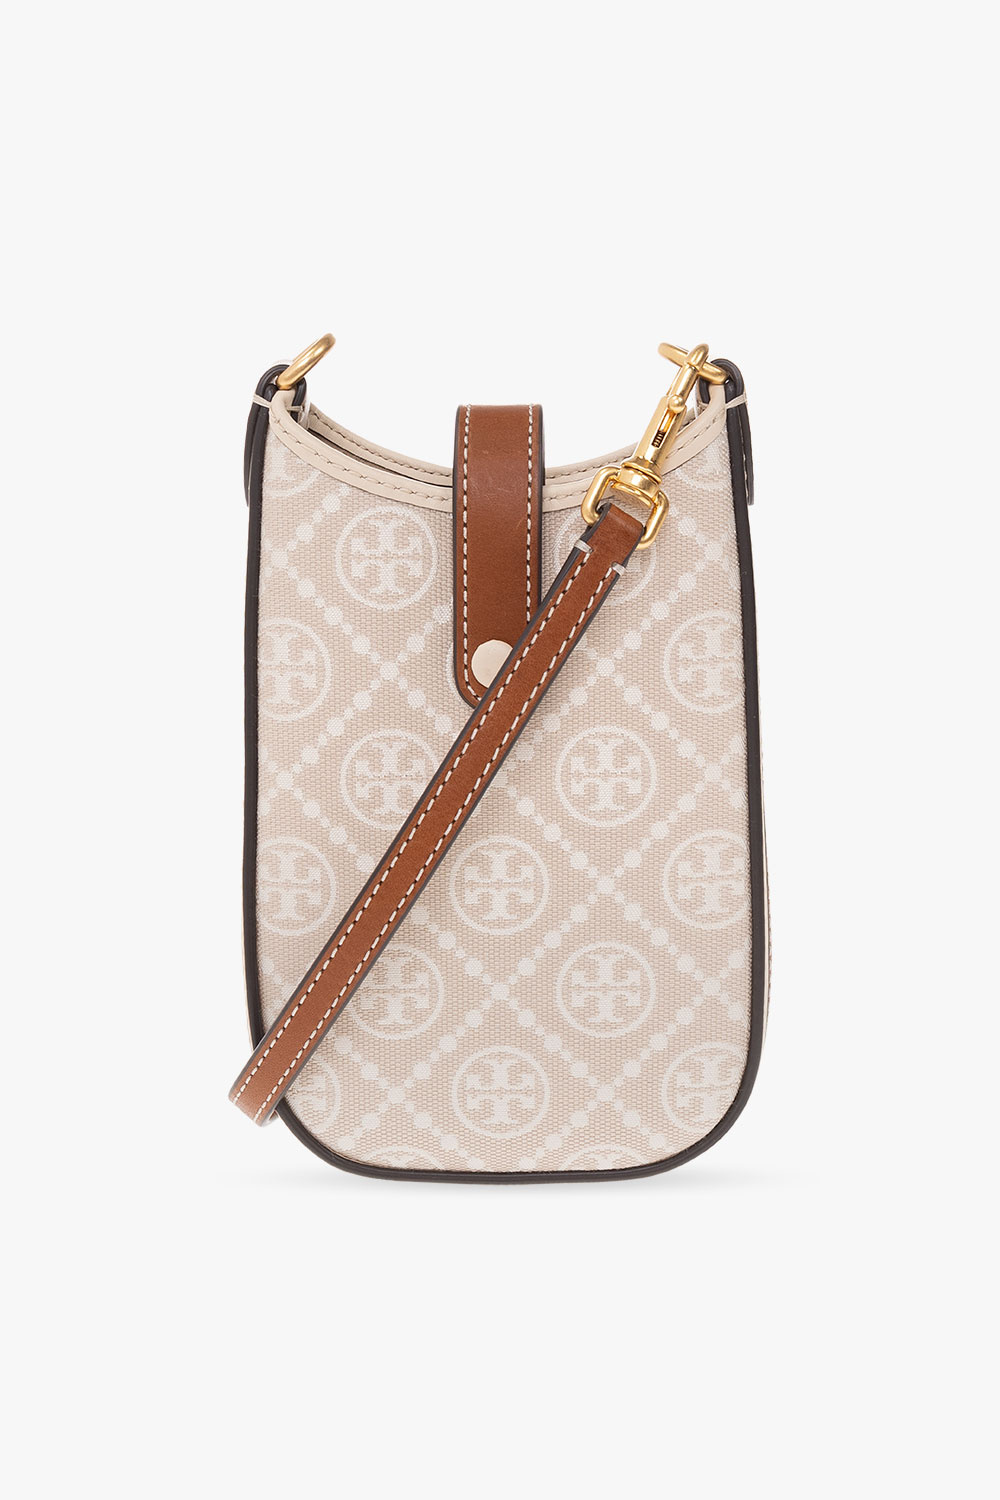 Tory Burch Strapped phone holder | Women's Accessories | Vitkac